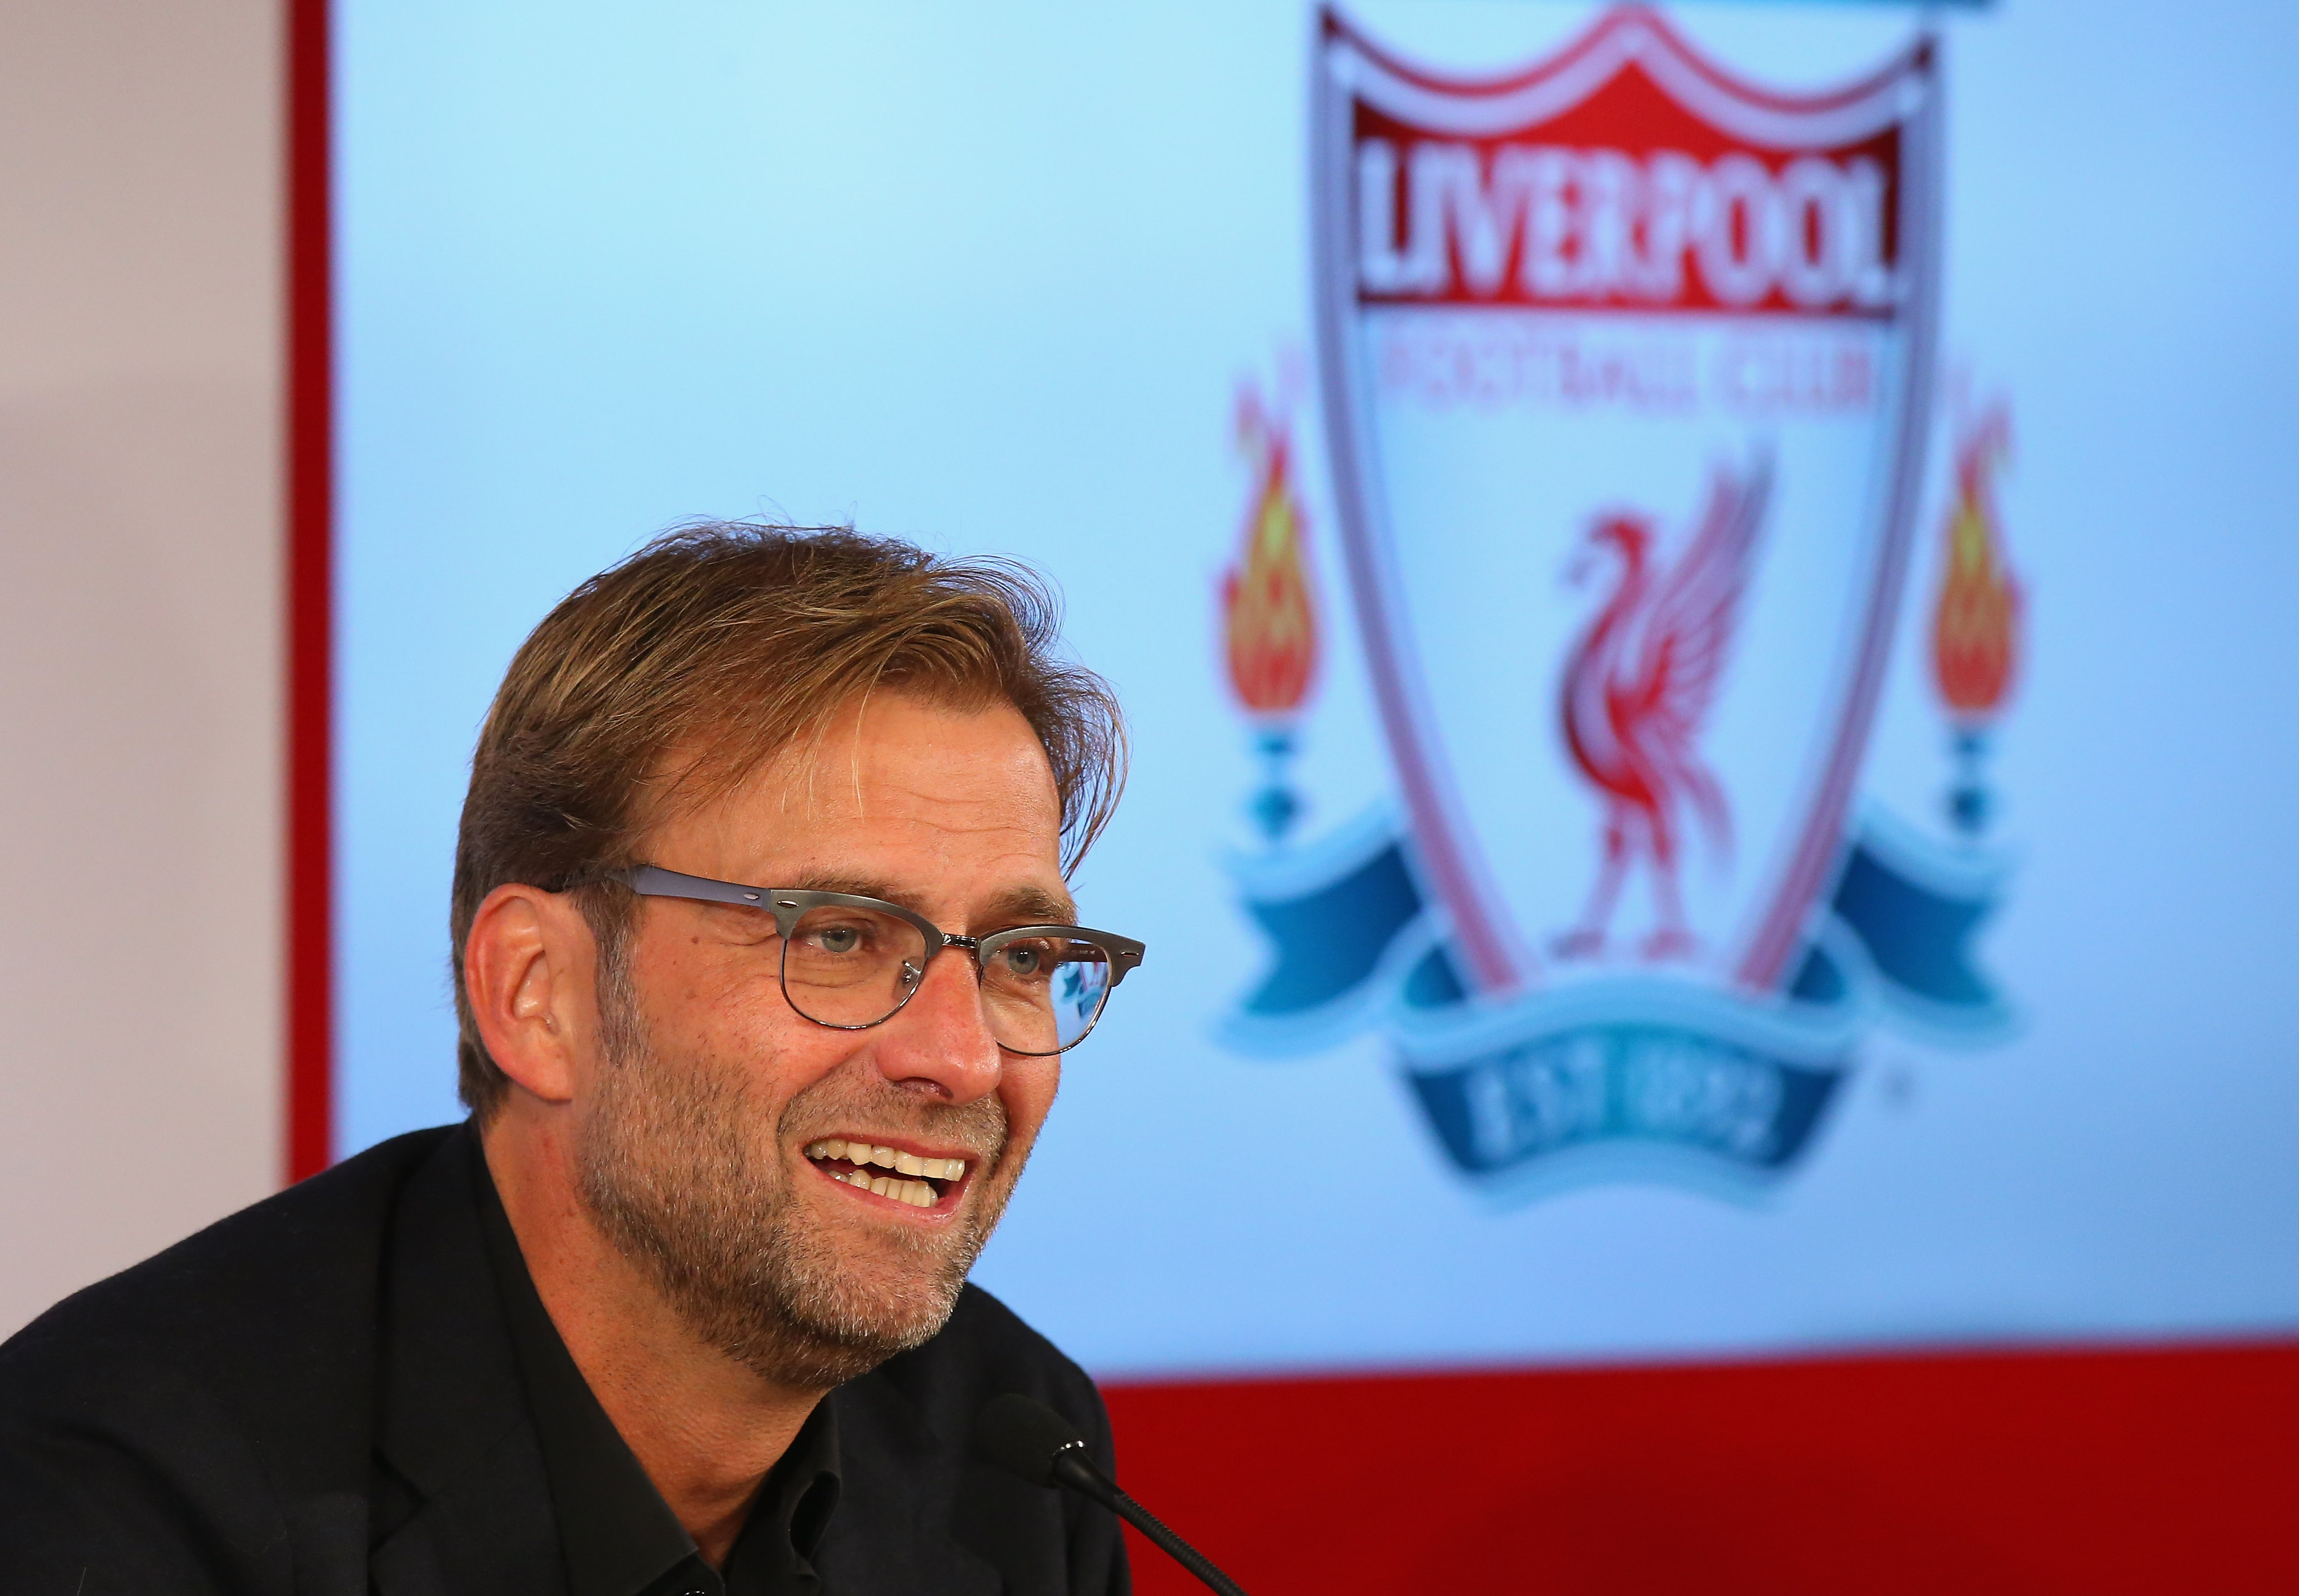 Jurgen Klopp at Anfield is unveiled as the new manager of Liverpool FC during a press conference at Anfield on October 9, 2015 in Liverpool, England.